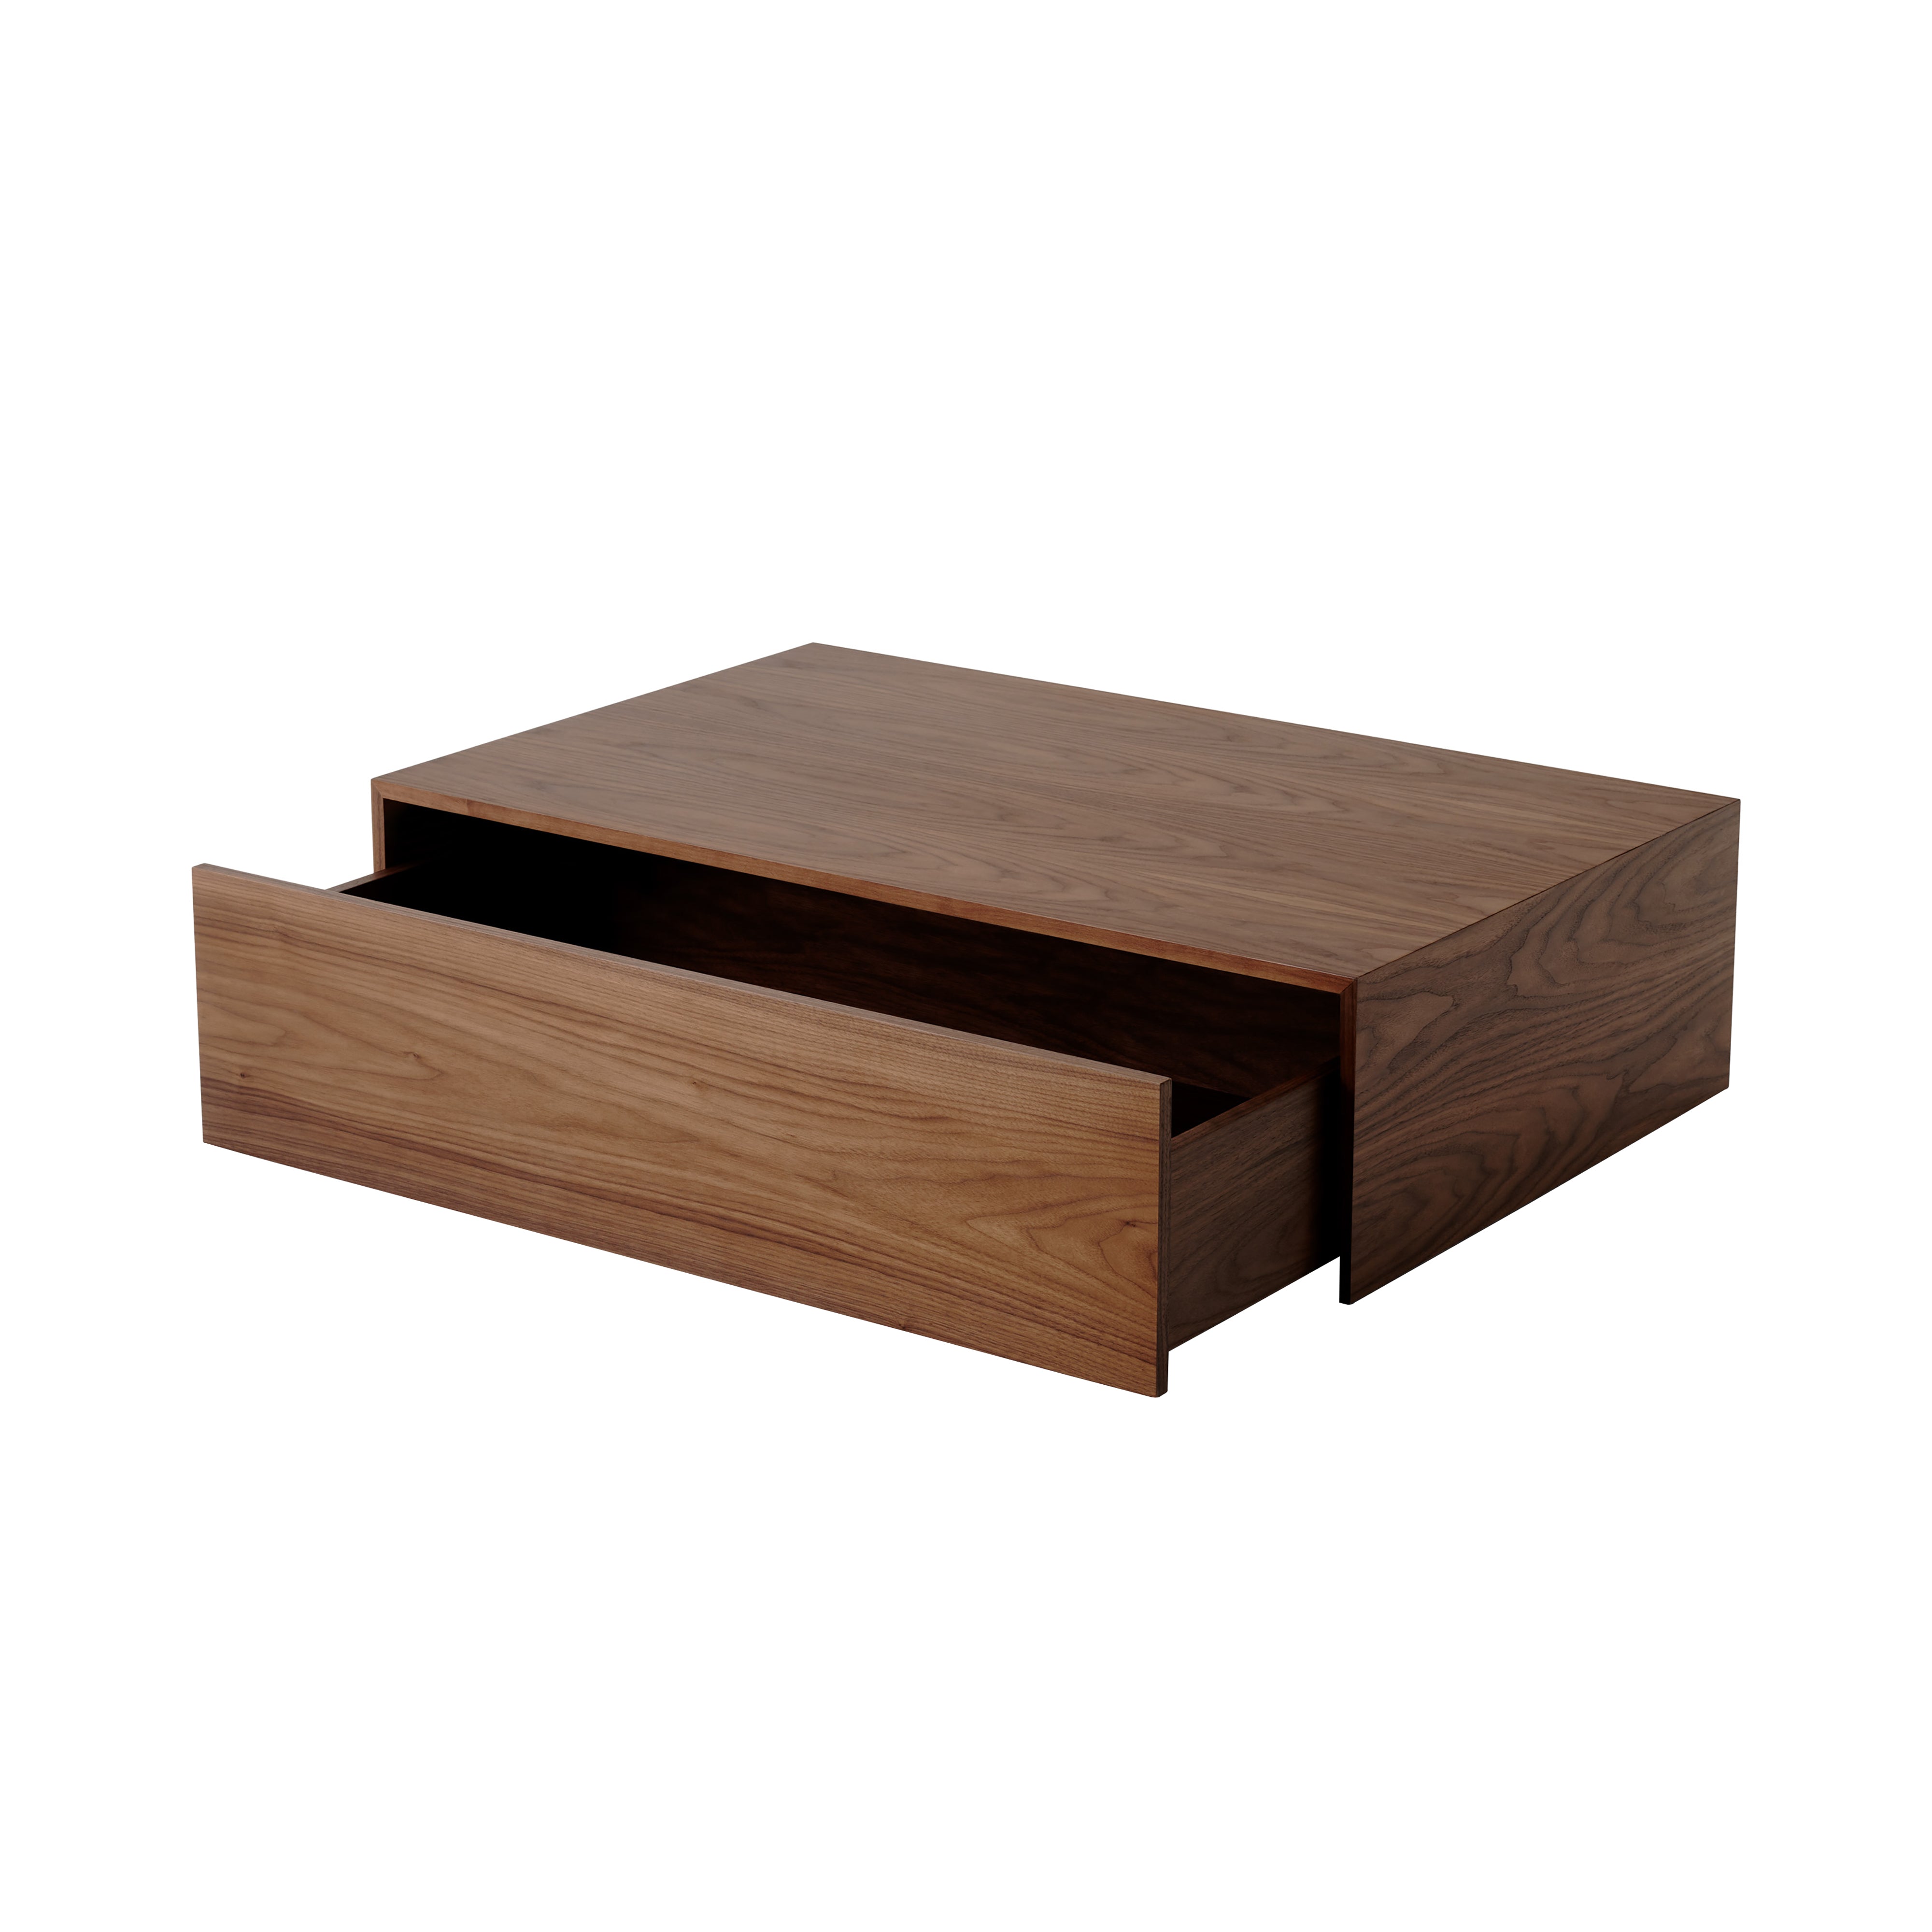 Mass Coffee Table High: With Drawer